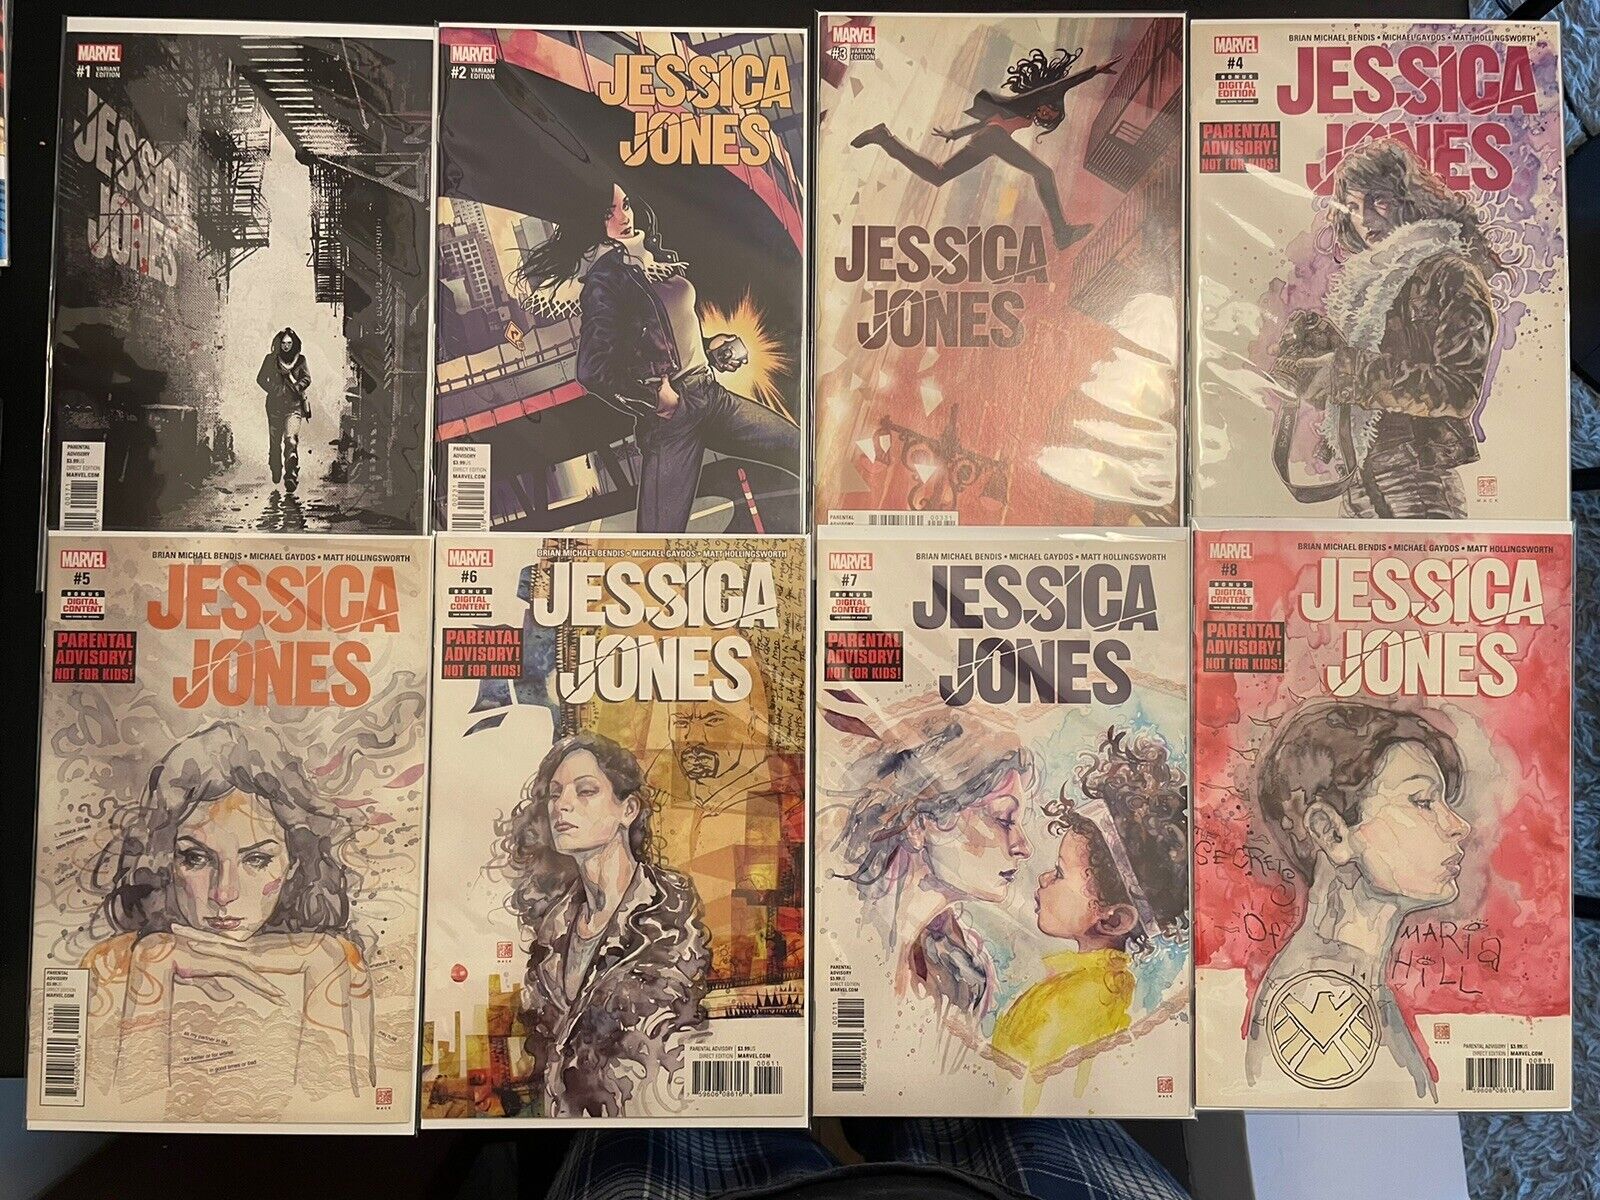 Jessica Jones #1-8 Variant Covers 1 2 3, Cover A 4 5 6 7 8